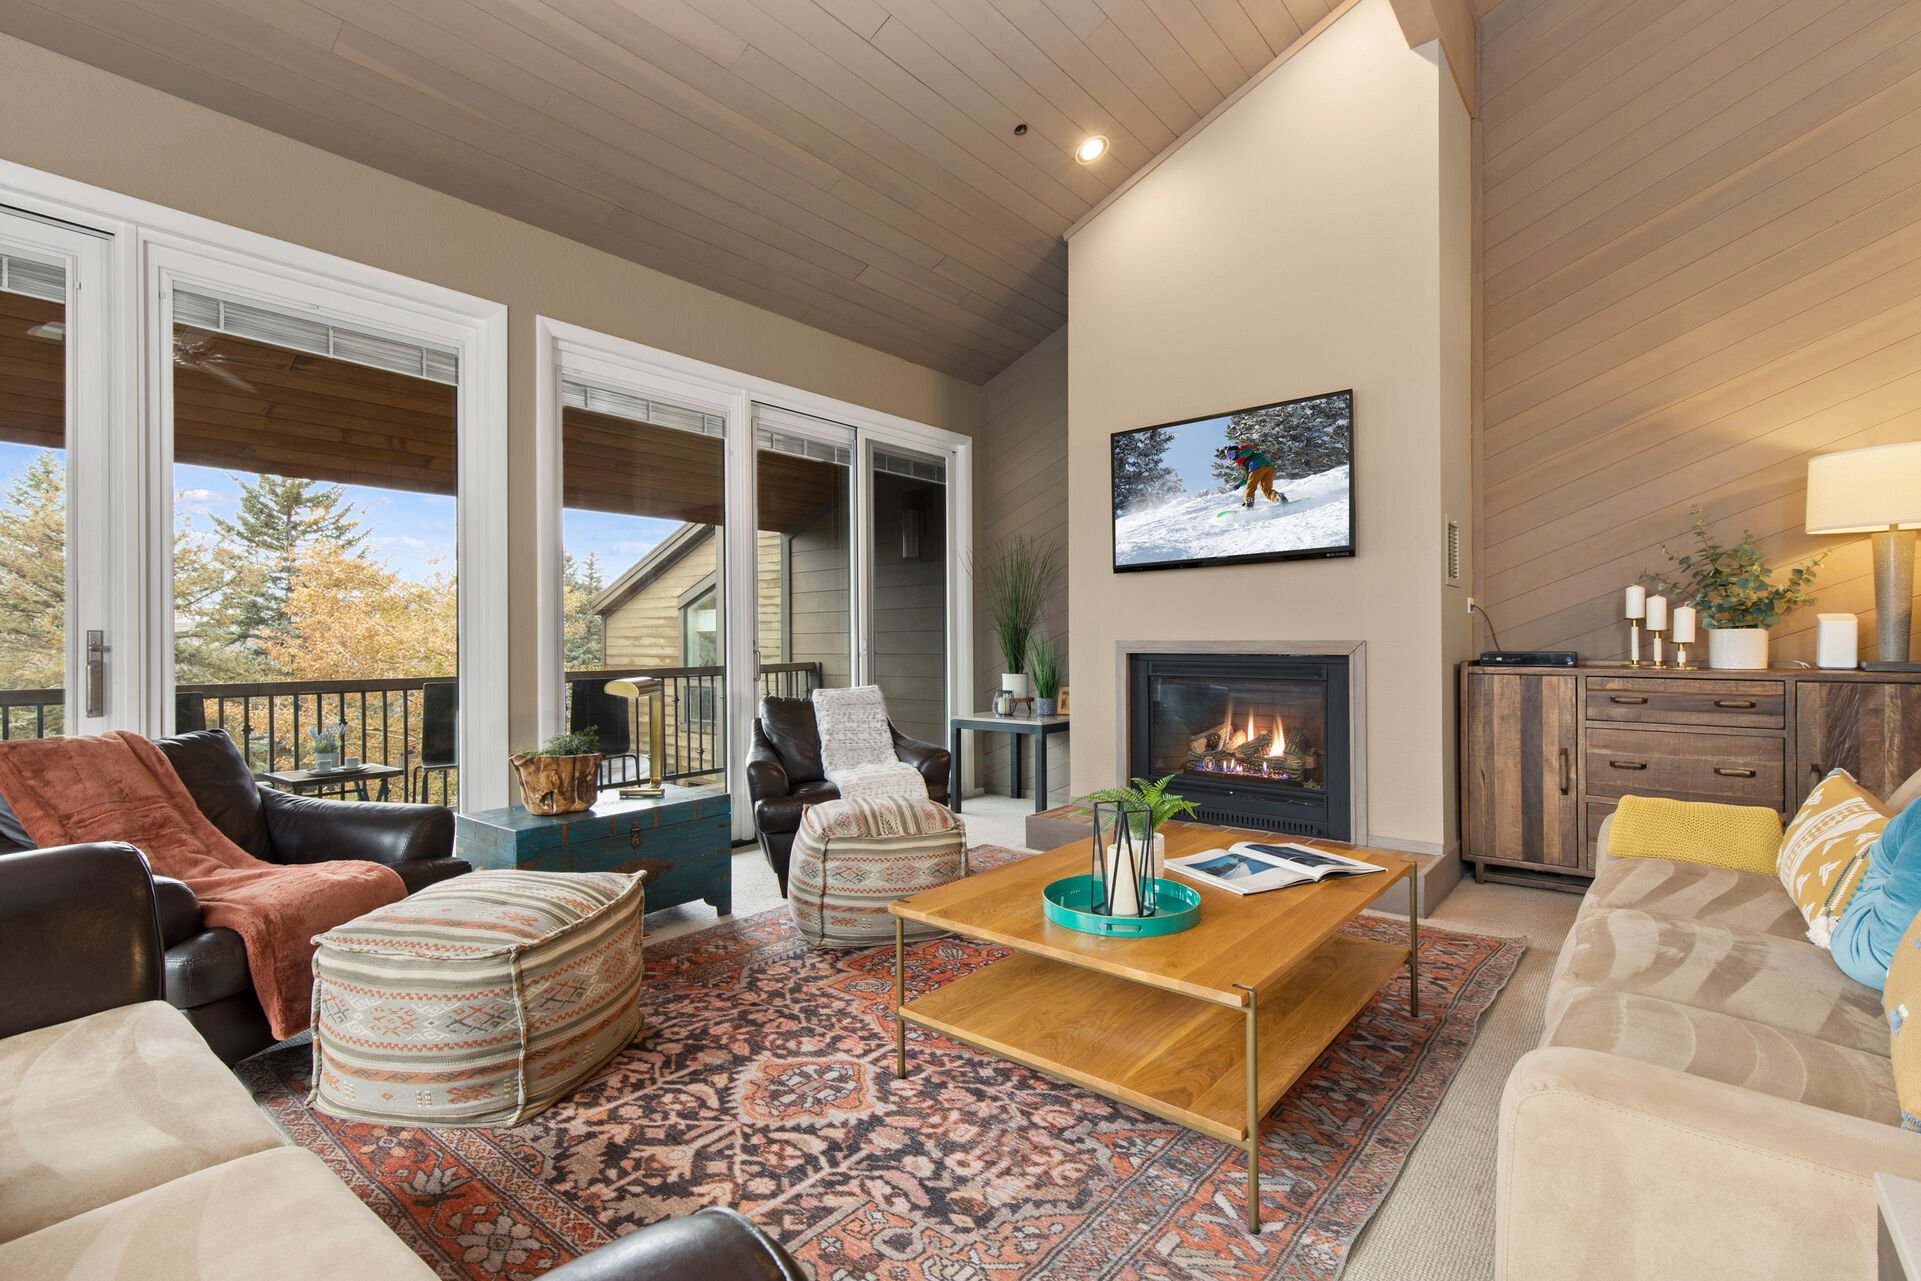 Smart TV, cozy gas fireplace, and patio access with views